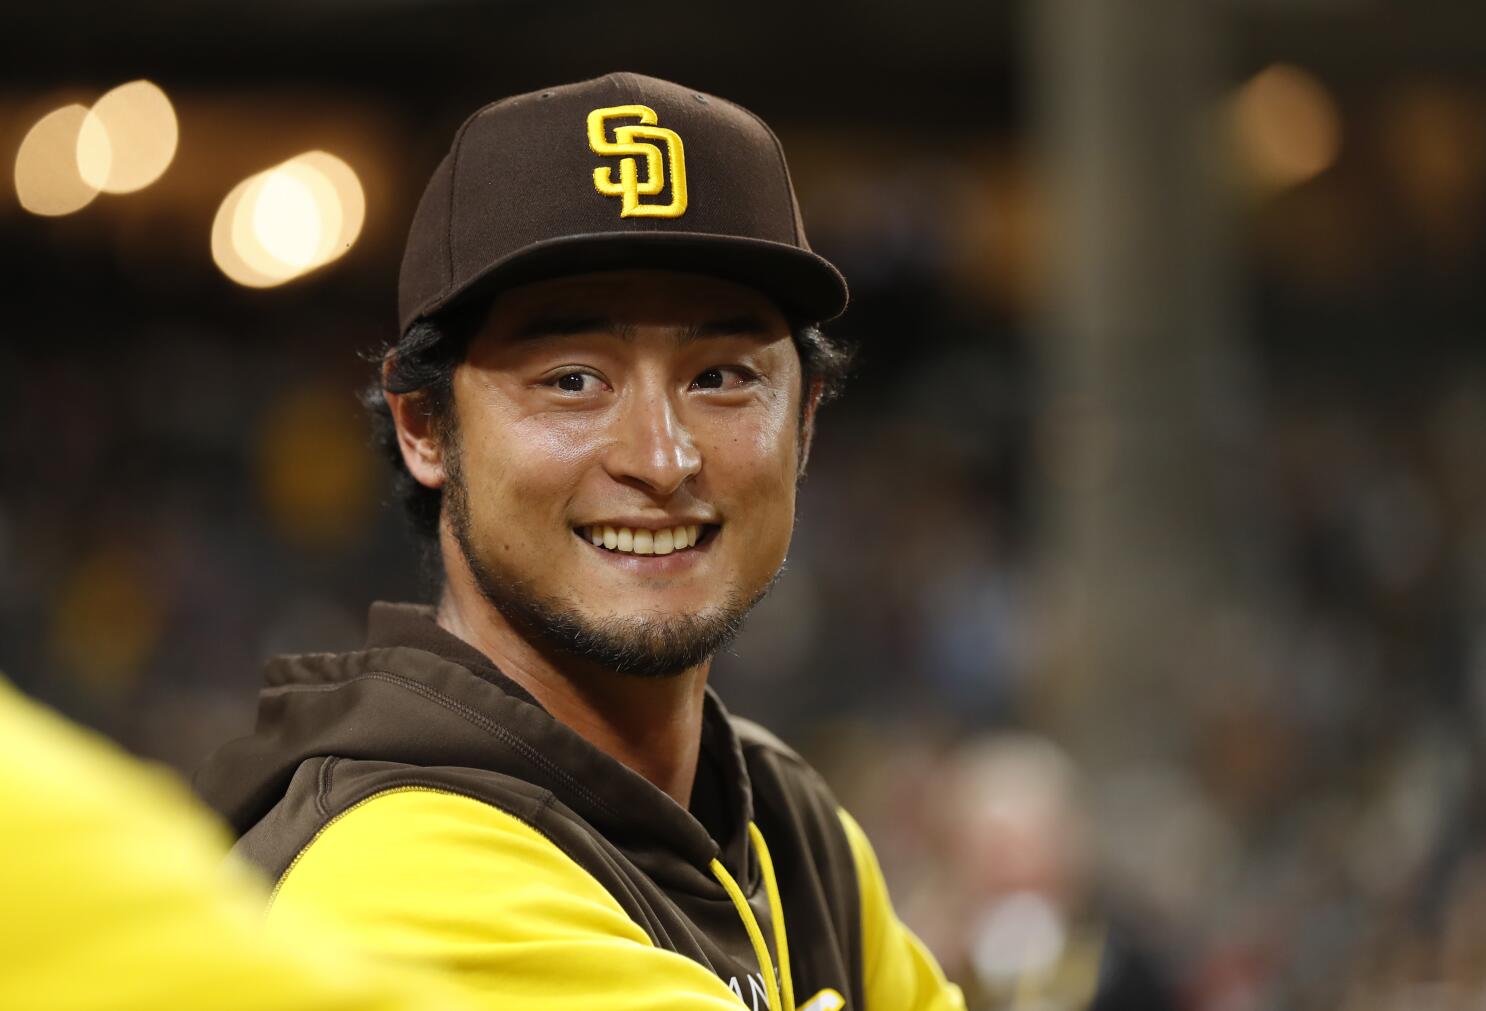 Padres roster review: Yu Darvish - The San Diego Union-Tribune